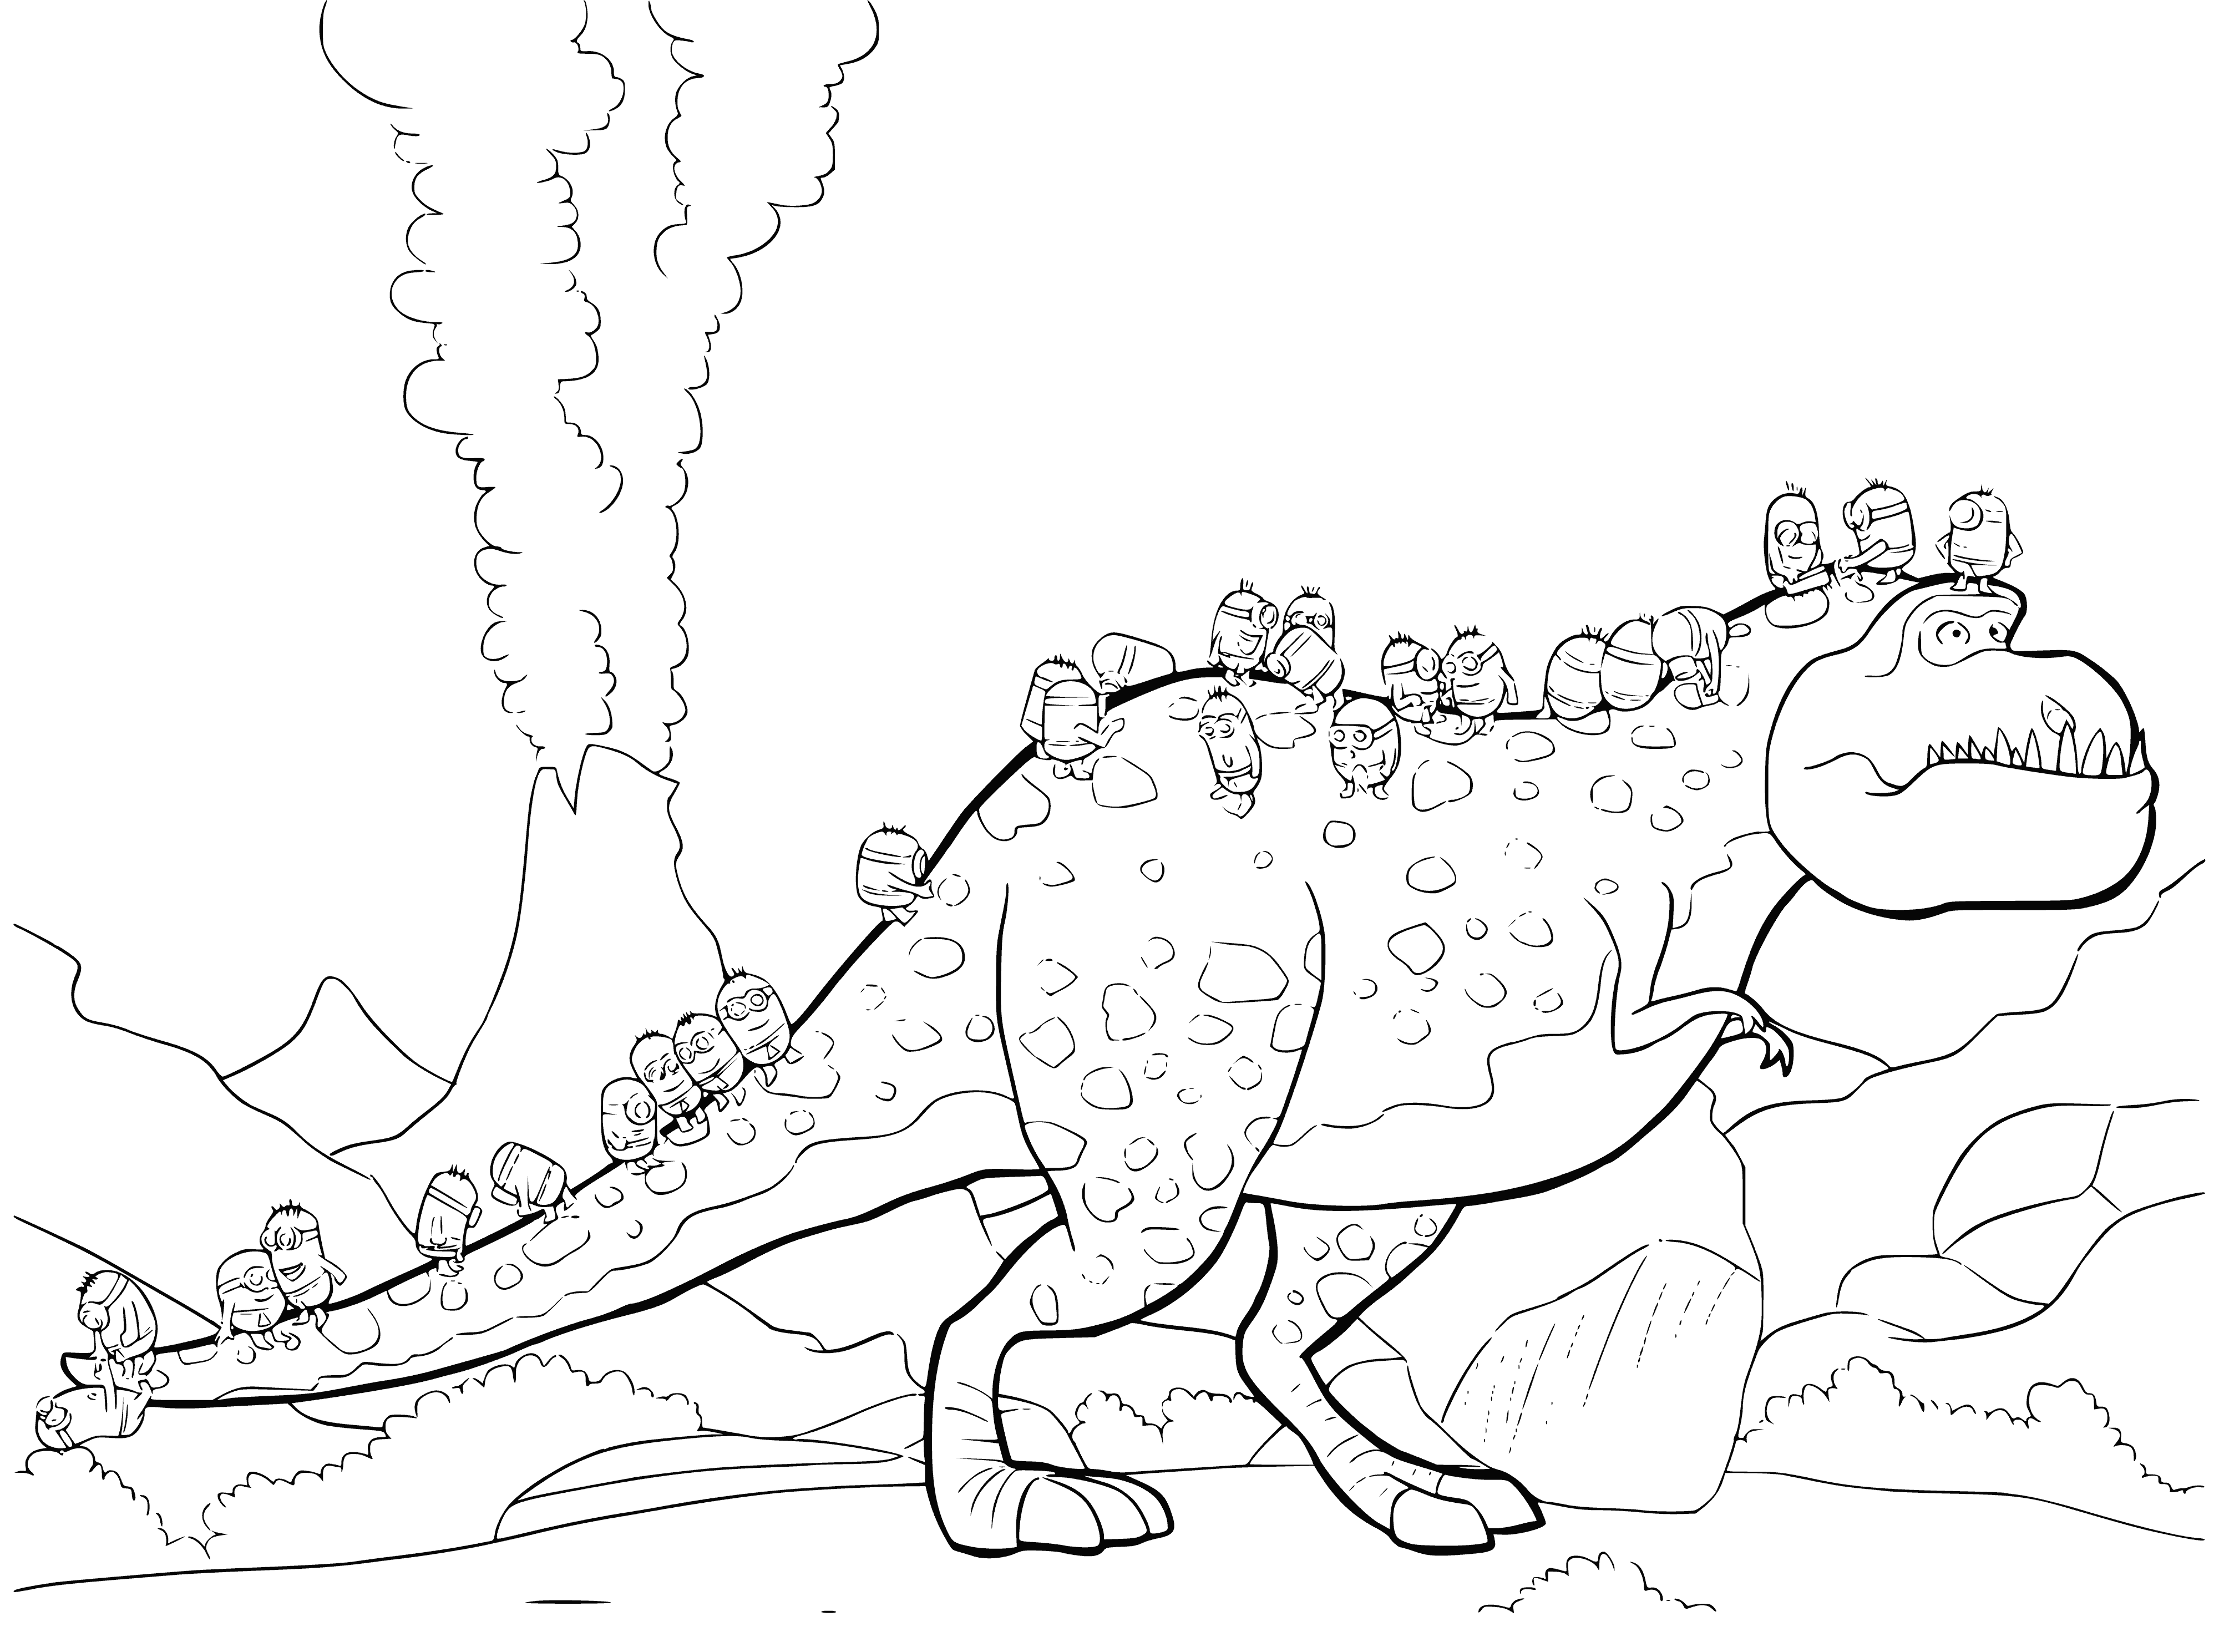 coloring page: Five minions ride a dinosaur, each with a different expression. Two ride the front, and three sit on the back, hanging on with their hands.